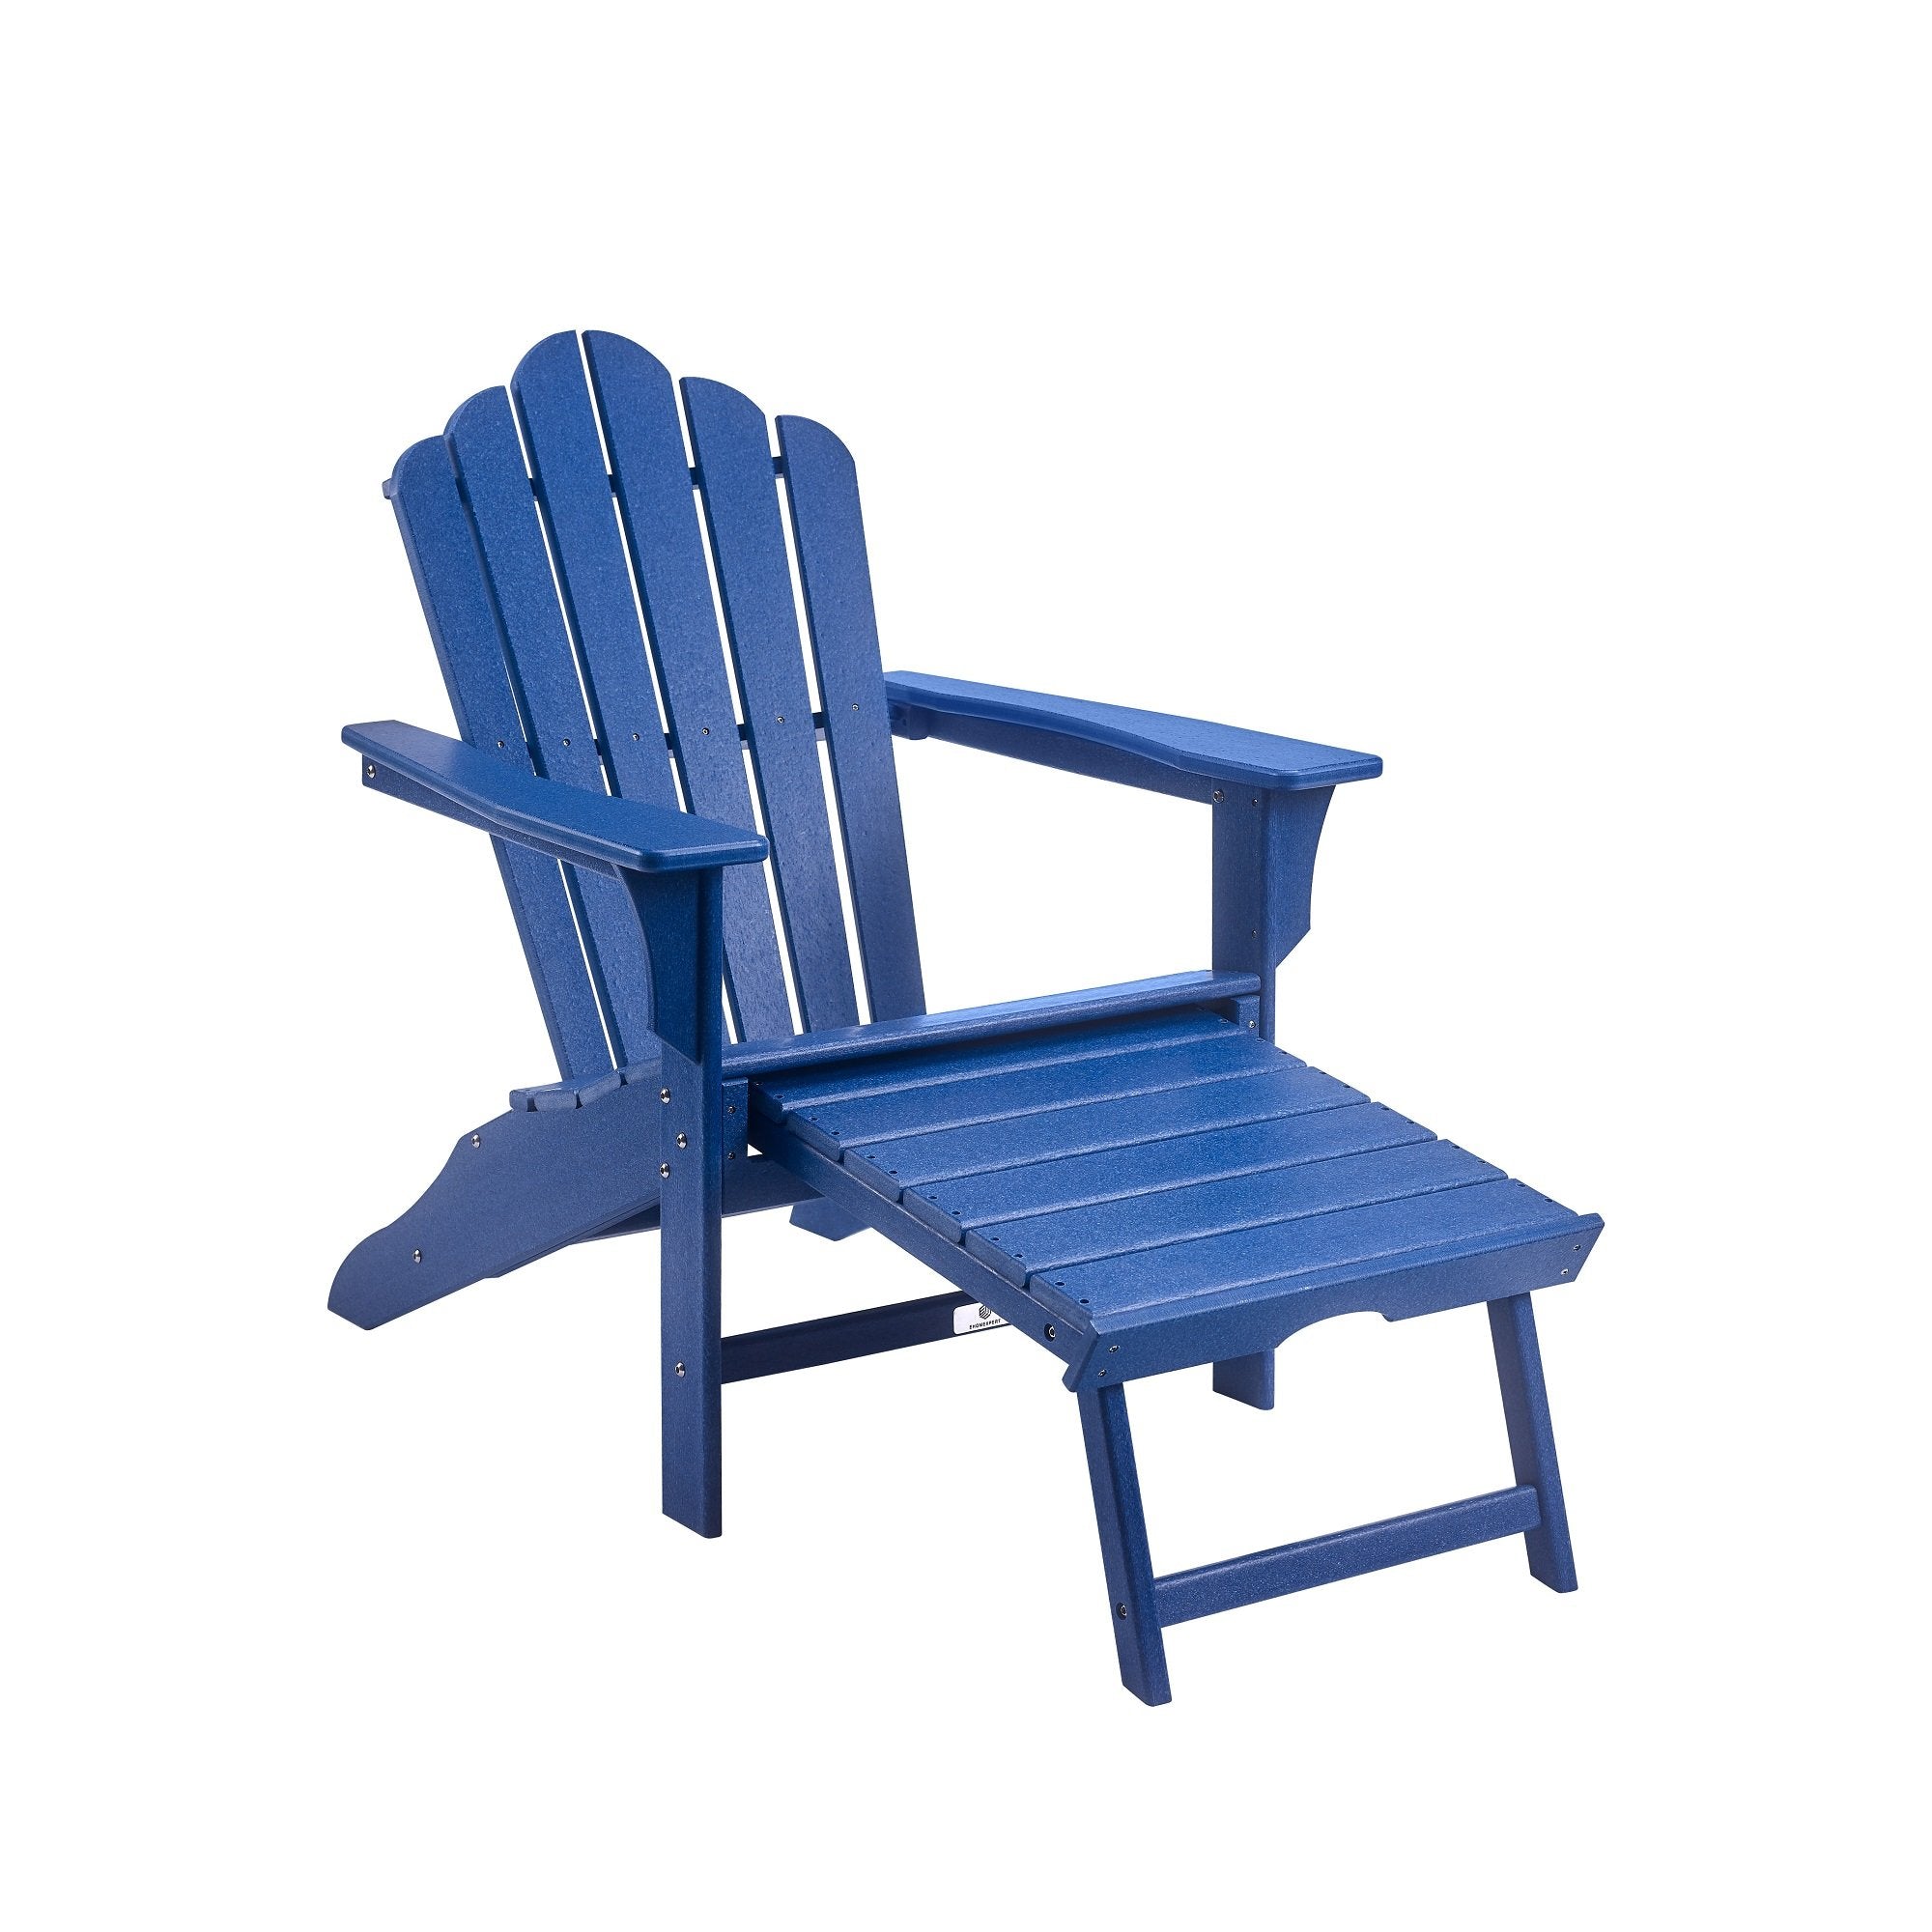 Classic Outdoor Adirondack Chair with Footrest for Garden Porch Patio Deck Backyard